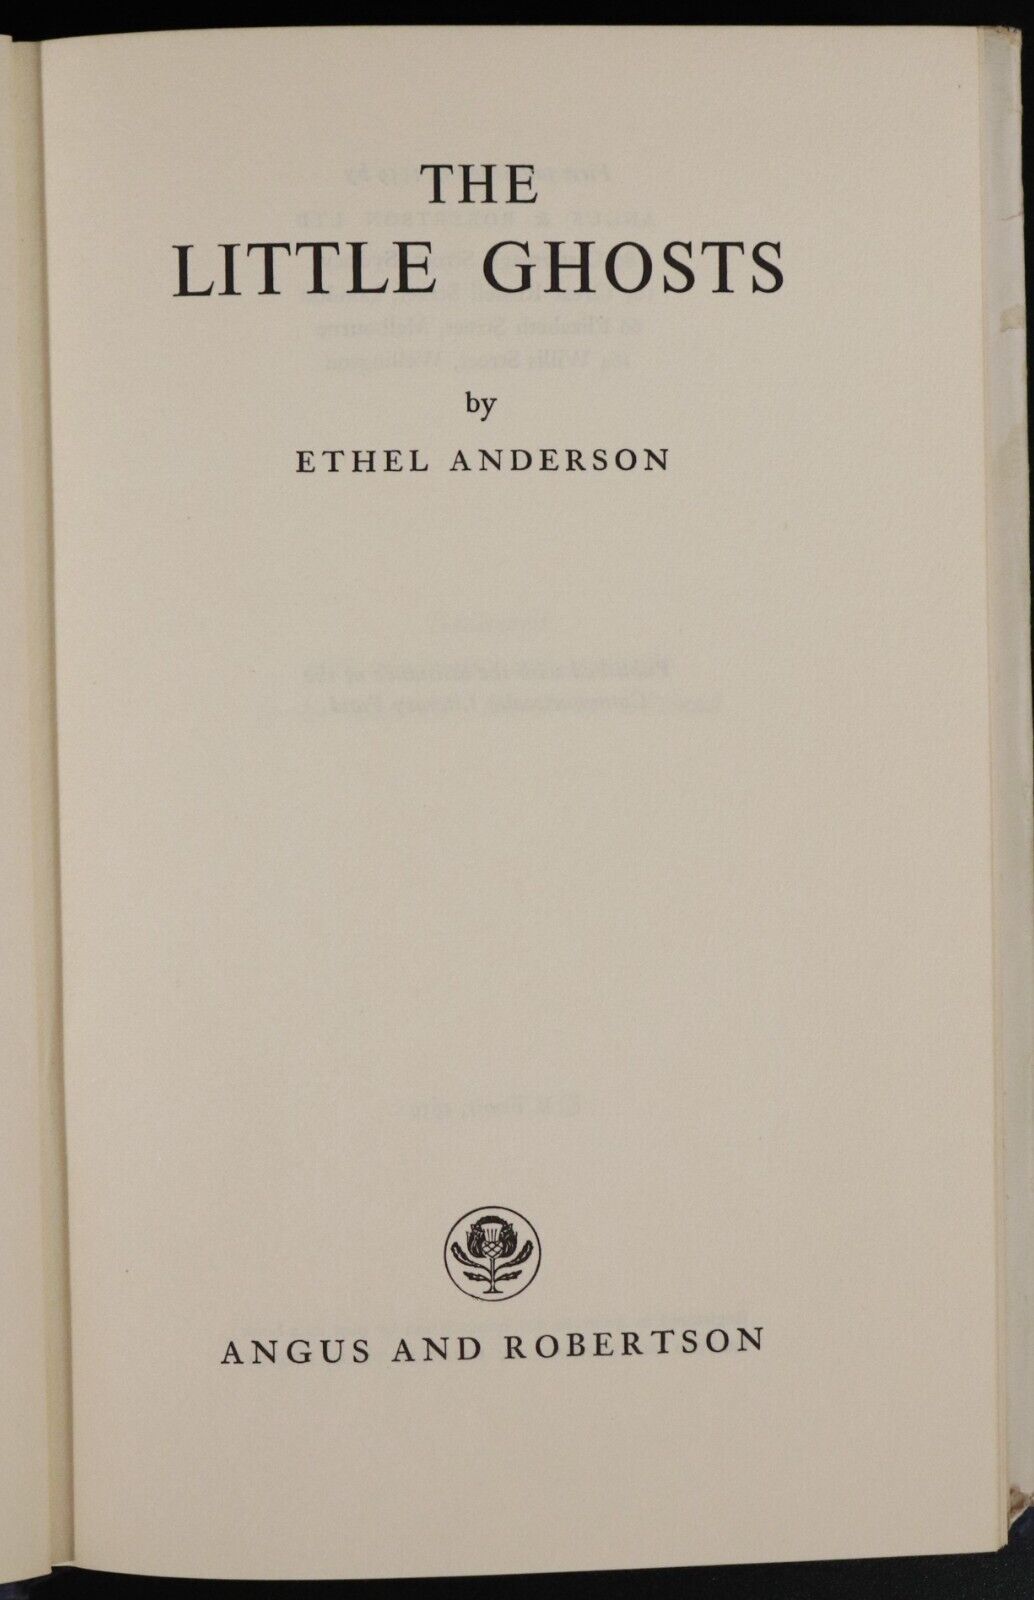 1959 The Little Ghosts by Ethel Anderson 1st Edition Australian Fiction Book - 0